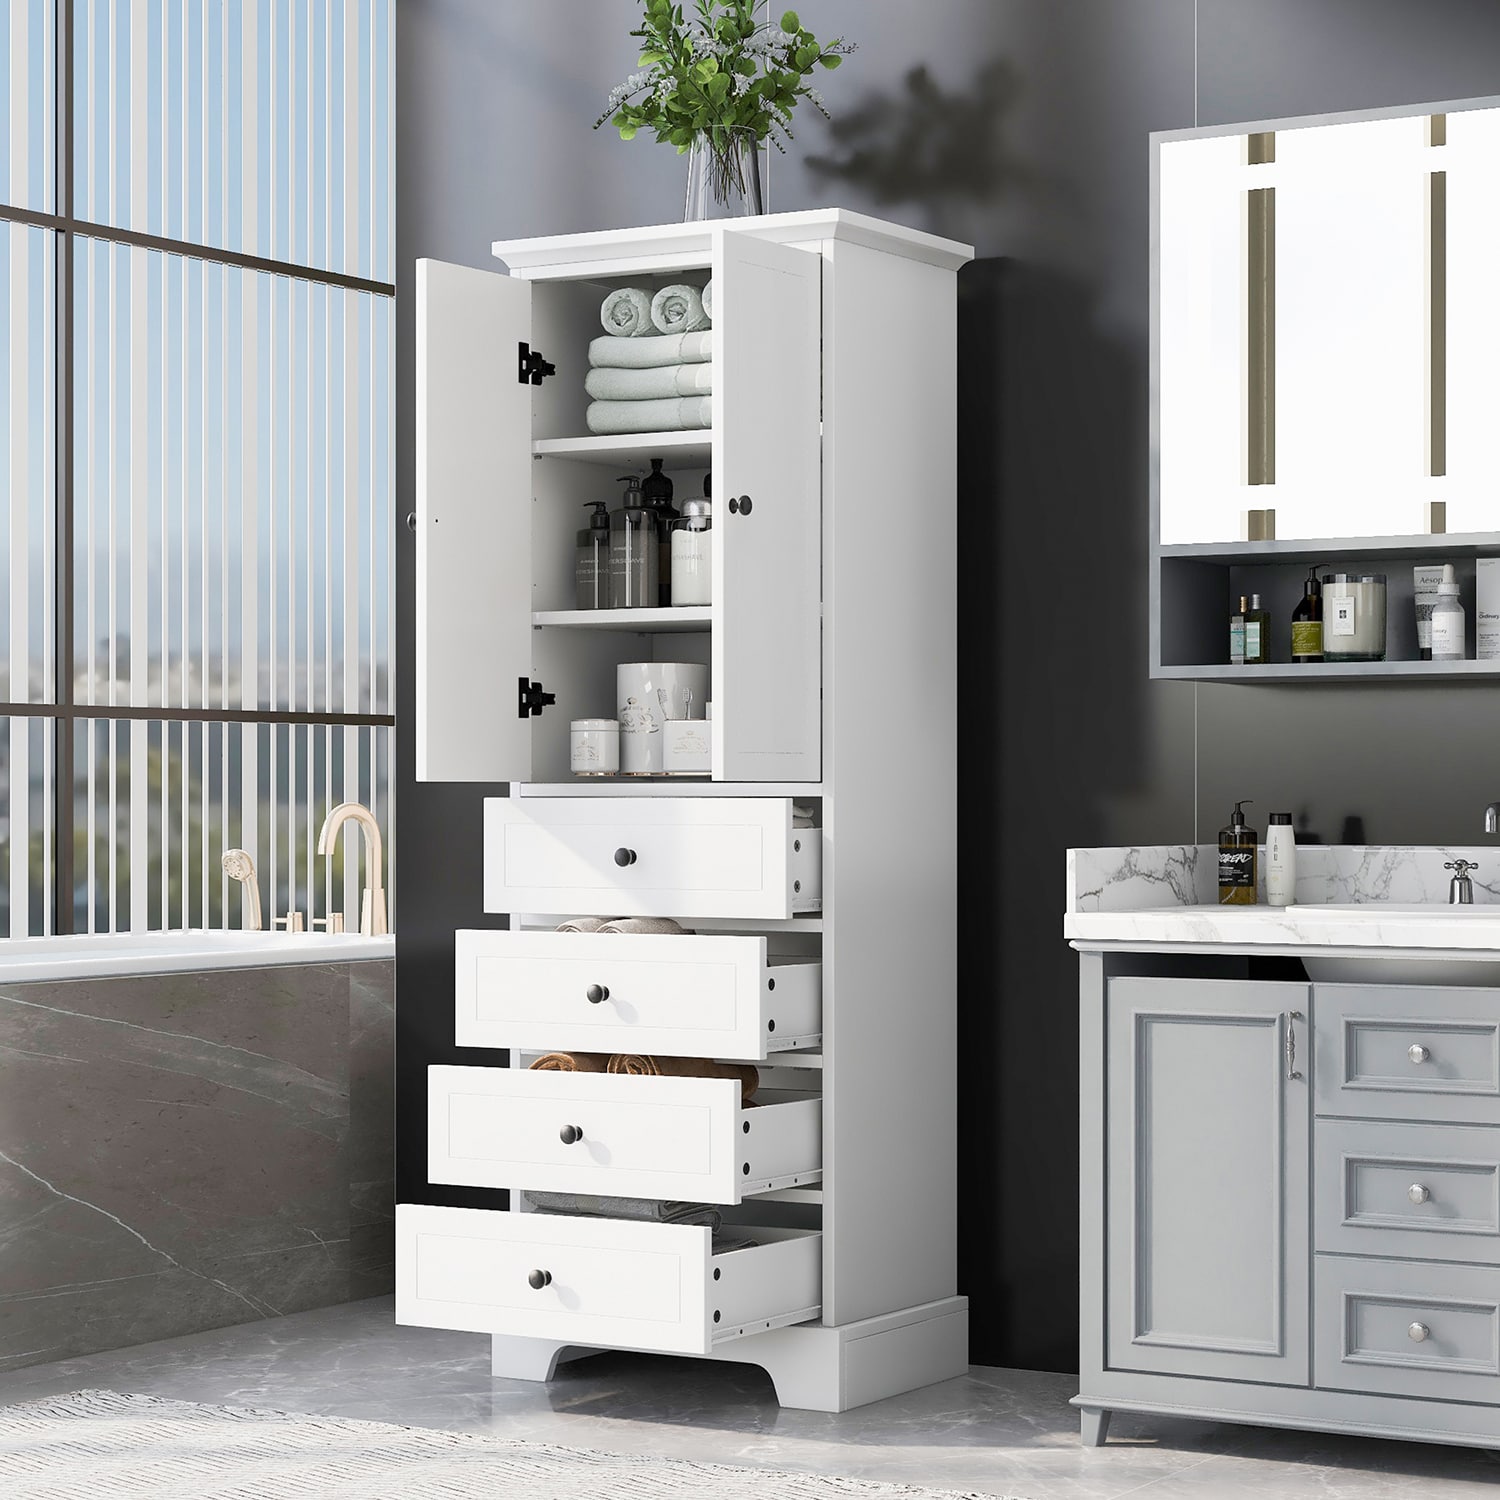 Tall Freestanding Bathroom Storage Cabinet With Drawers And Acrylic Doors,  Green - ModernLuxe